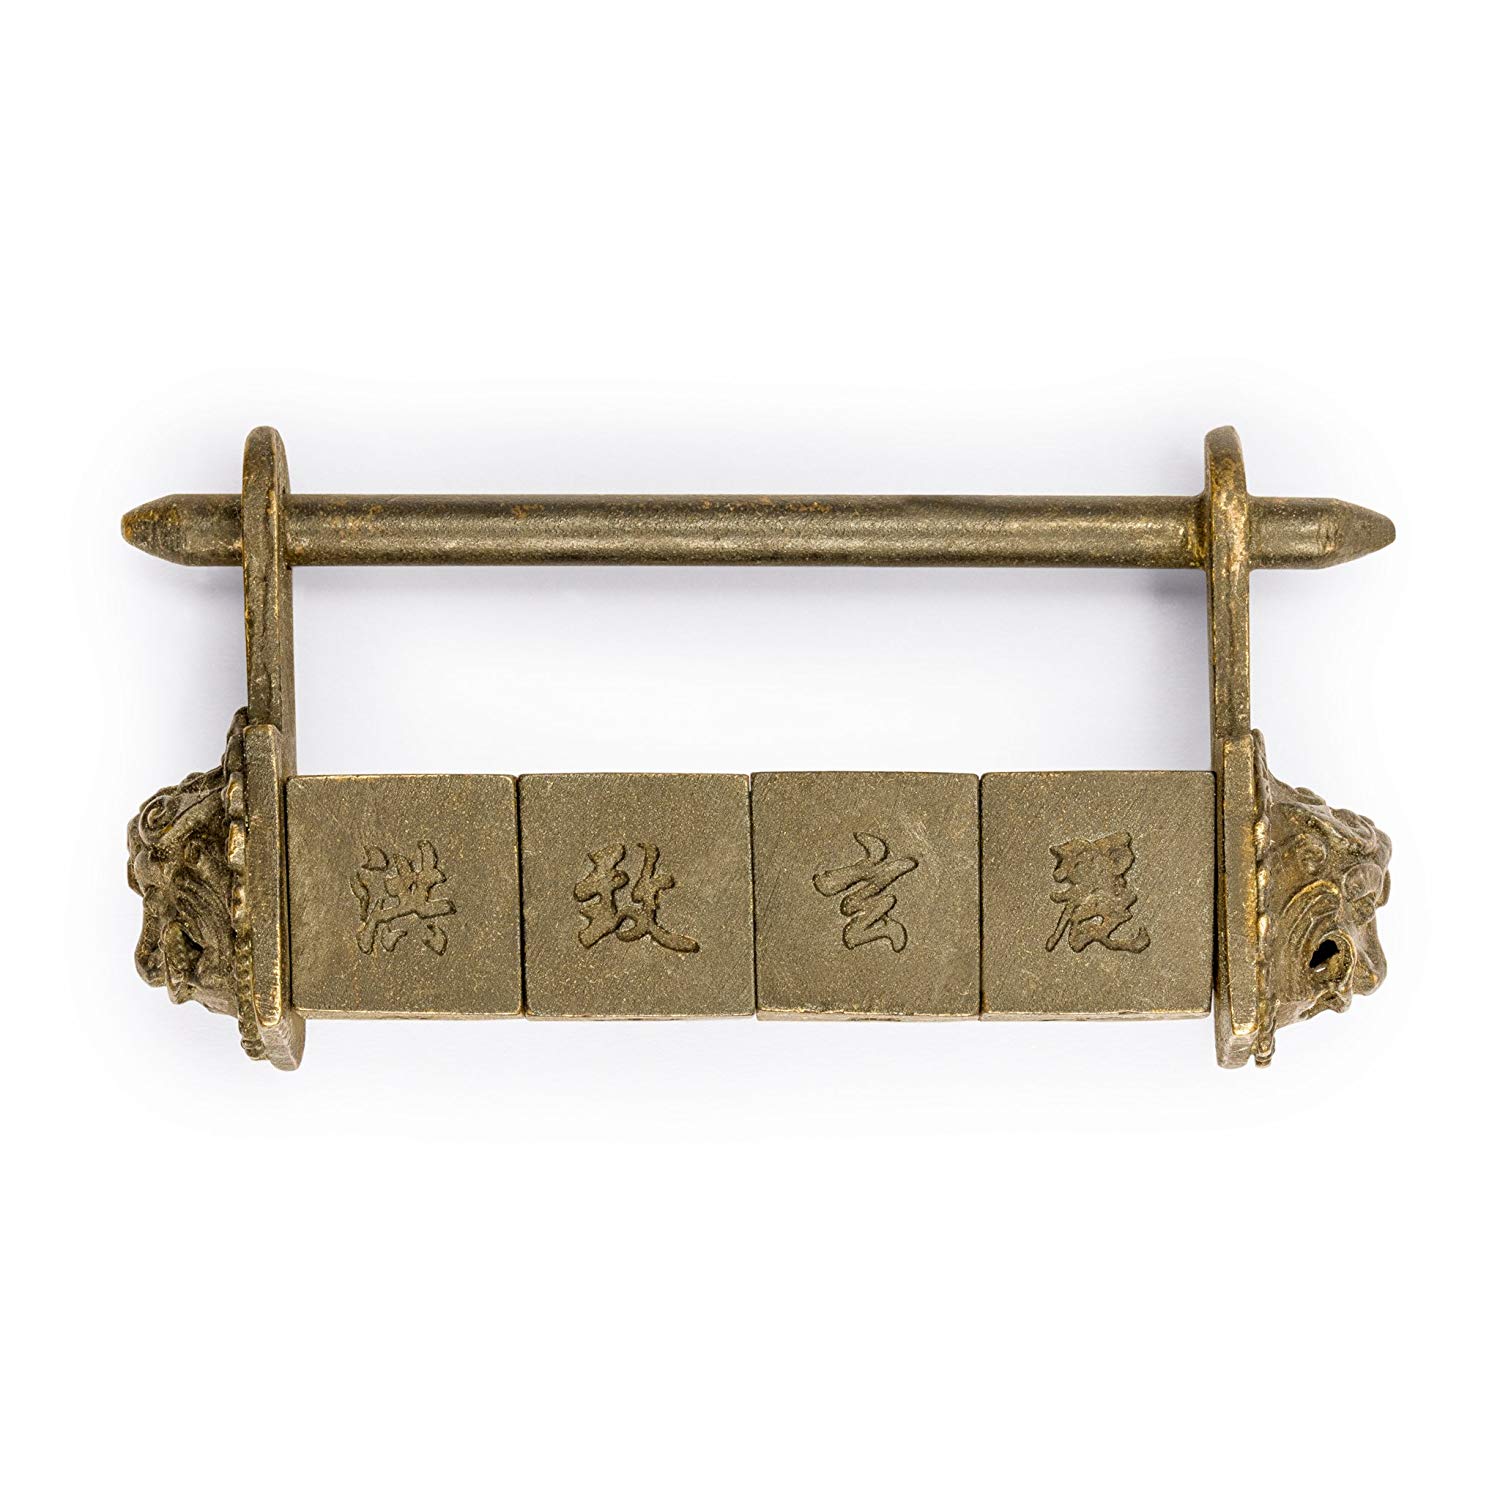 Made from hard Chinese Brass, this 3 lock puzzle is simple and will still look cool after you crack it.   <br/><br/> You can pick this up at  <a href="https://amzn.to/2NNIwEe" target="_blank">Amazon for about $21.29</a>.